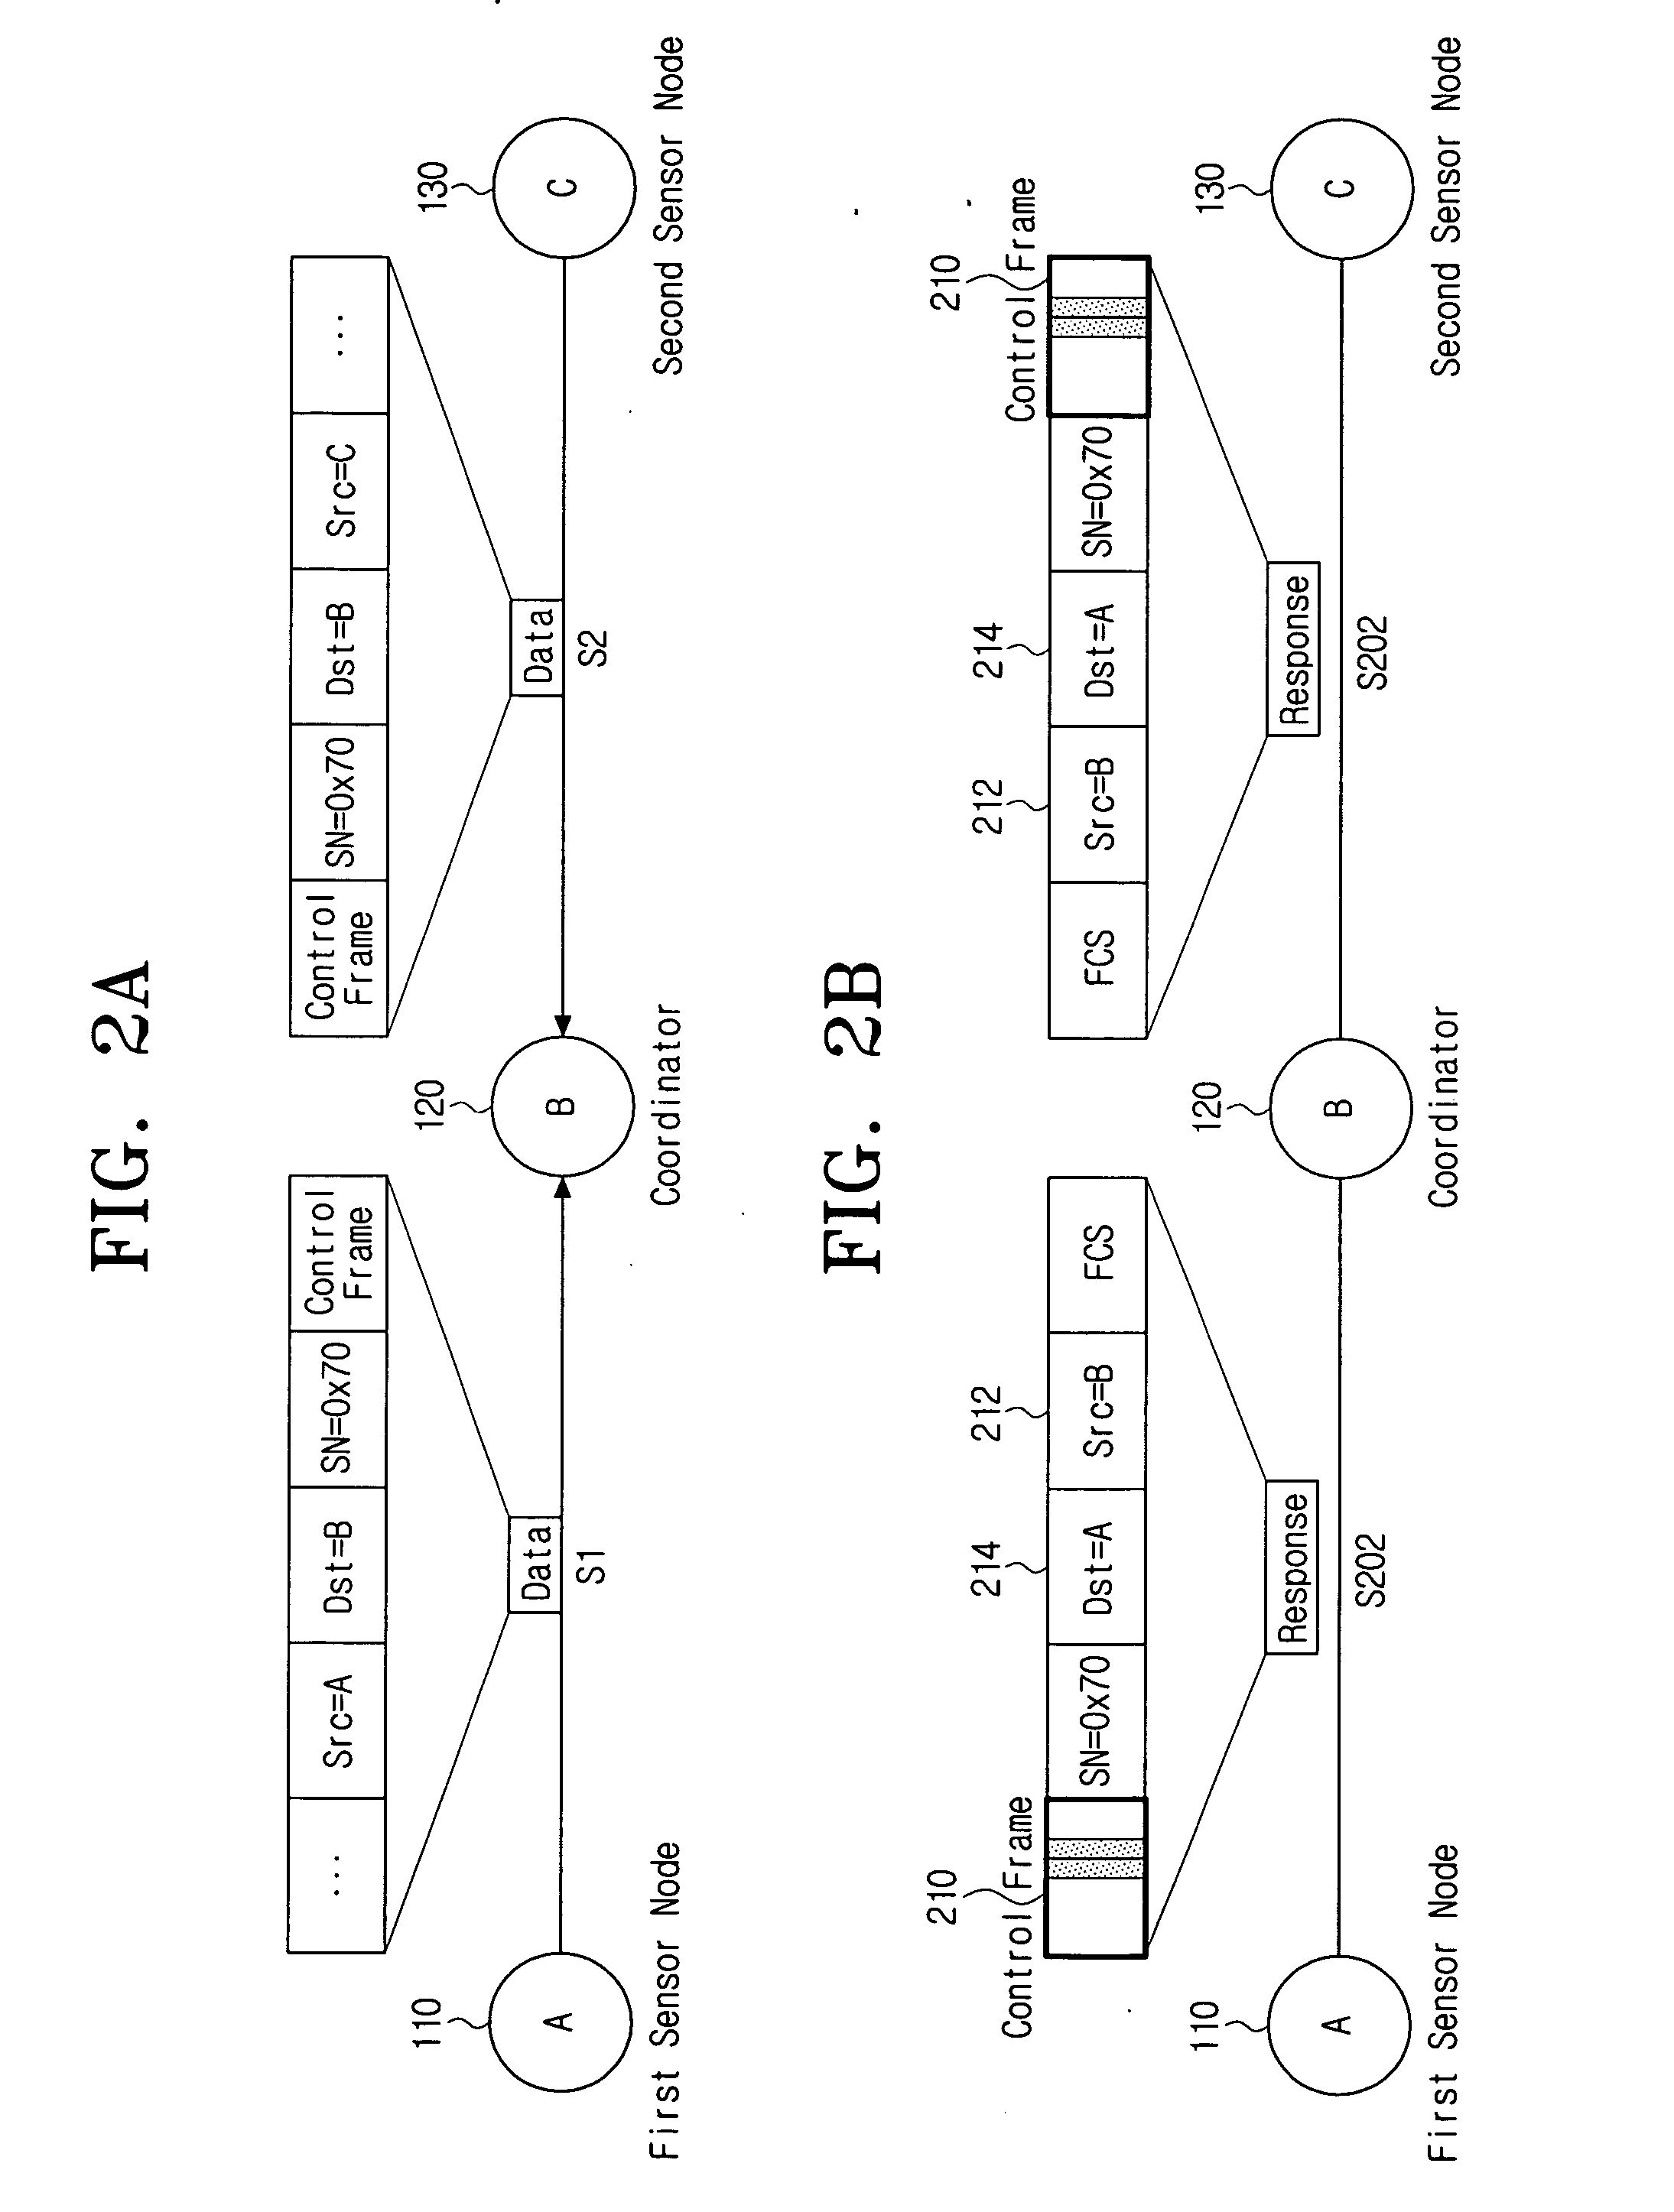 Local congestion-avoidance method in wireless personal area network